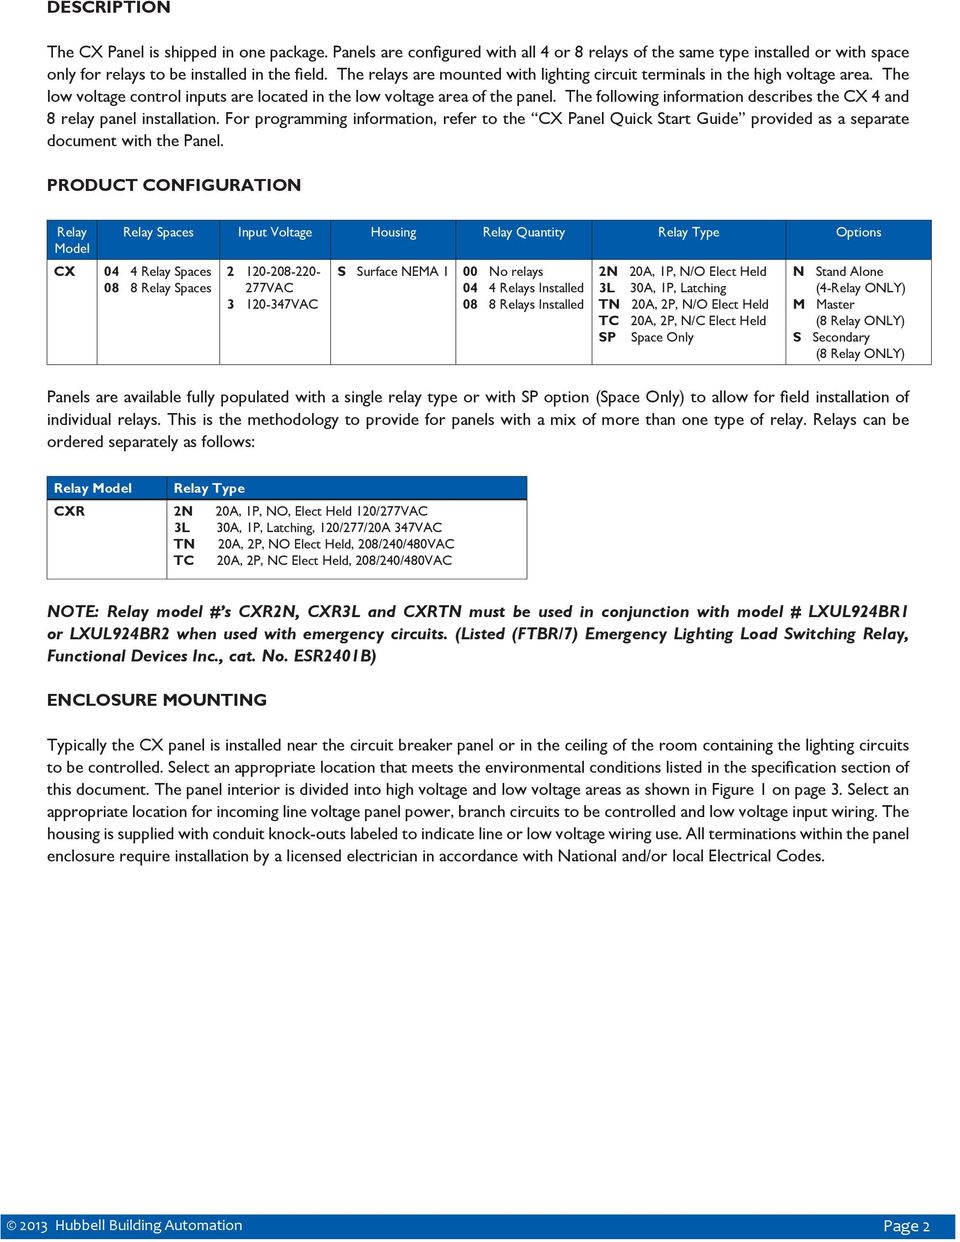 The following information describes the CX 4 and 8 relay panel installation. For programming information, refer to the CX Panel Quick Start Guide provided as a separate document with the Panel.